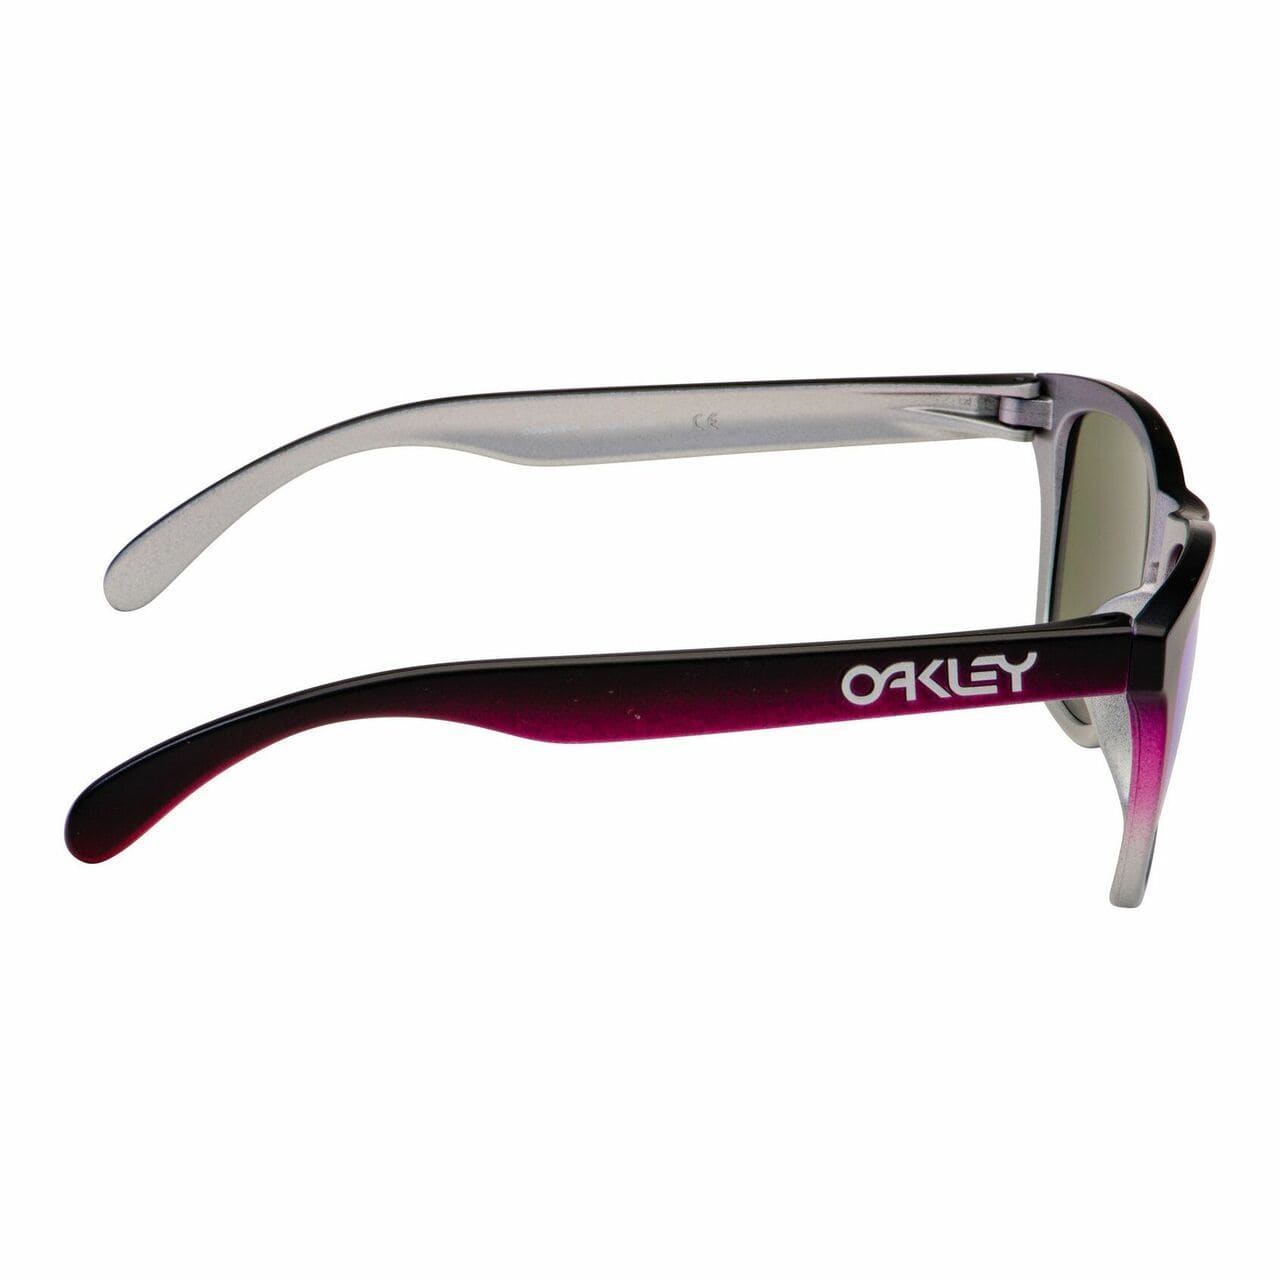 Oakley OO9245-8154 Frogskins Black Pink Fade Square Prizm Sapphire Lens Sunglasses 888392395139